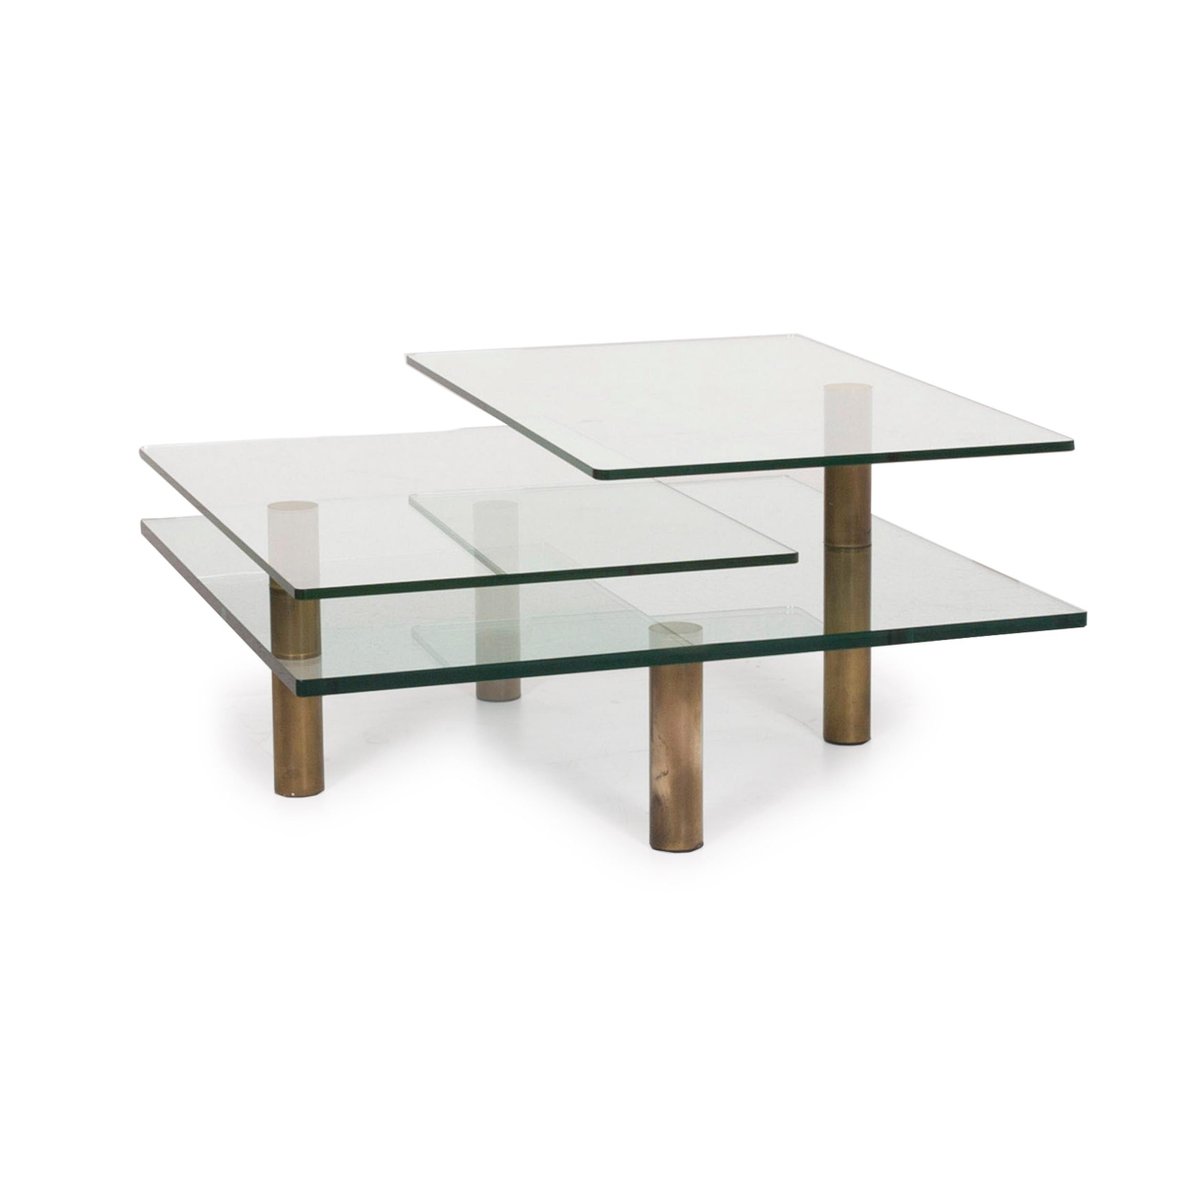 Imperial Glass Coffee Table With Function By Peter Draenert For Draenert For Sale At Pamono